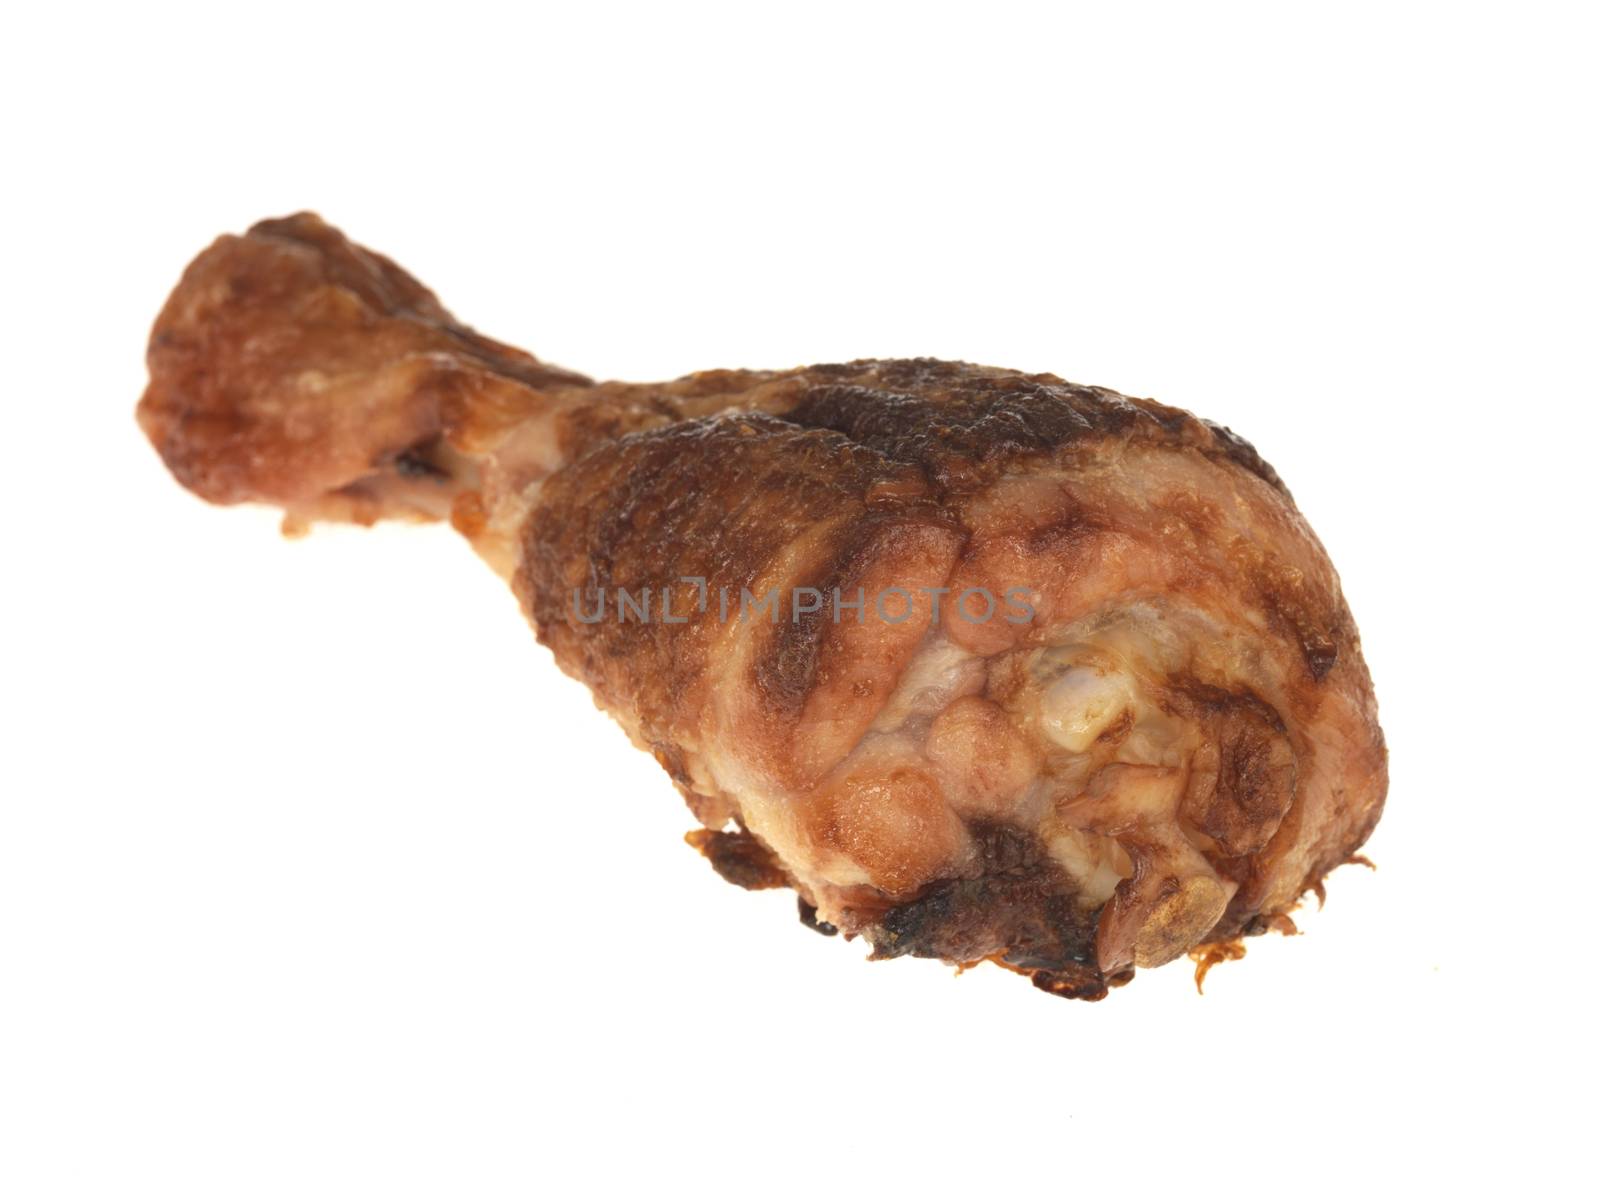 Cooked Chicken Leg by Whiteboxmedia